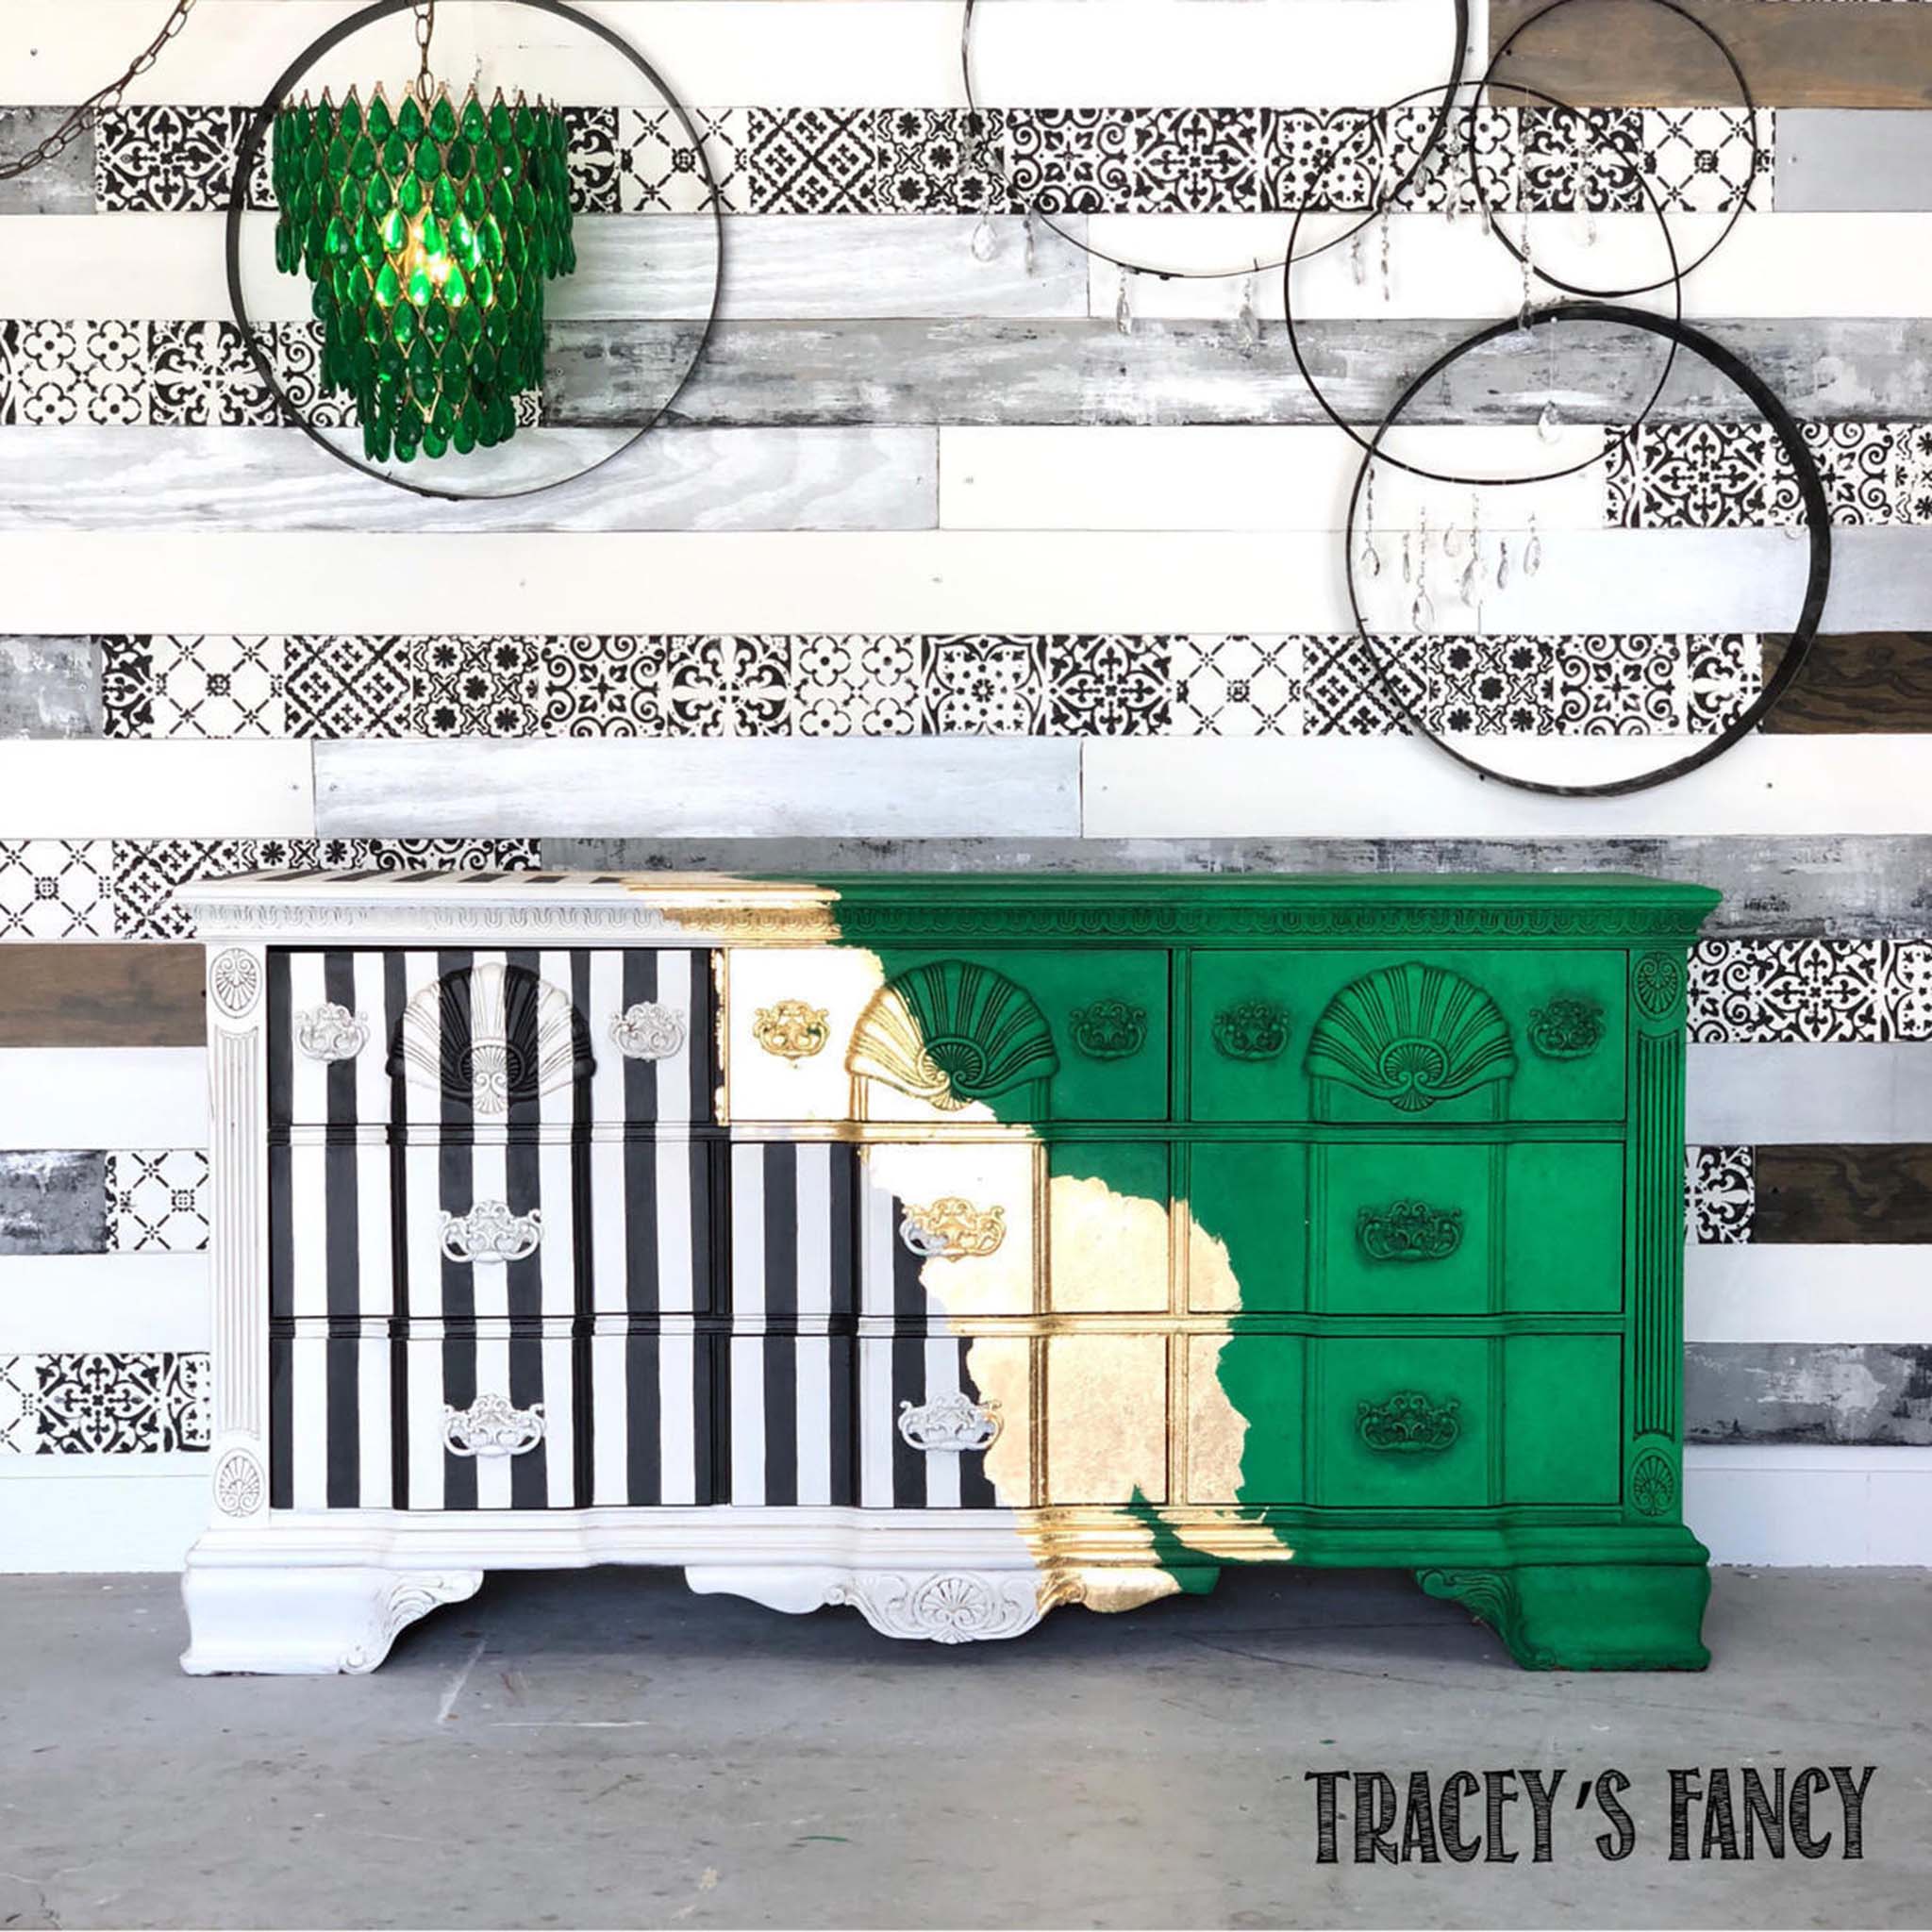 A vintage large 9 drawer dresser refurbished by Tracey's Fancy is painted half green on the right and white with black verticle stripes on the left with gold leaf down the middle. The green is fully accented using Dixie Belle Paint's Grunge Glaze.